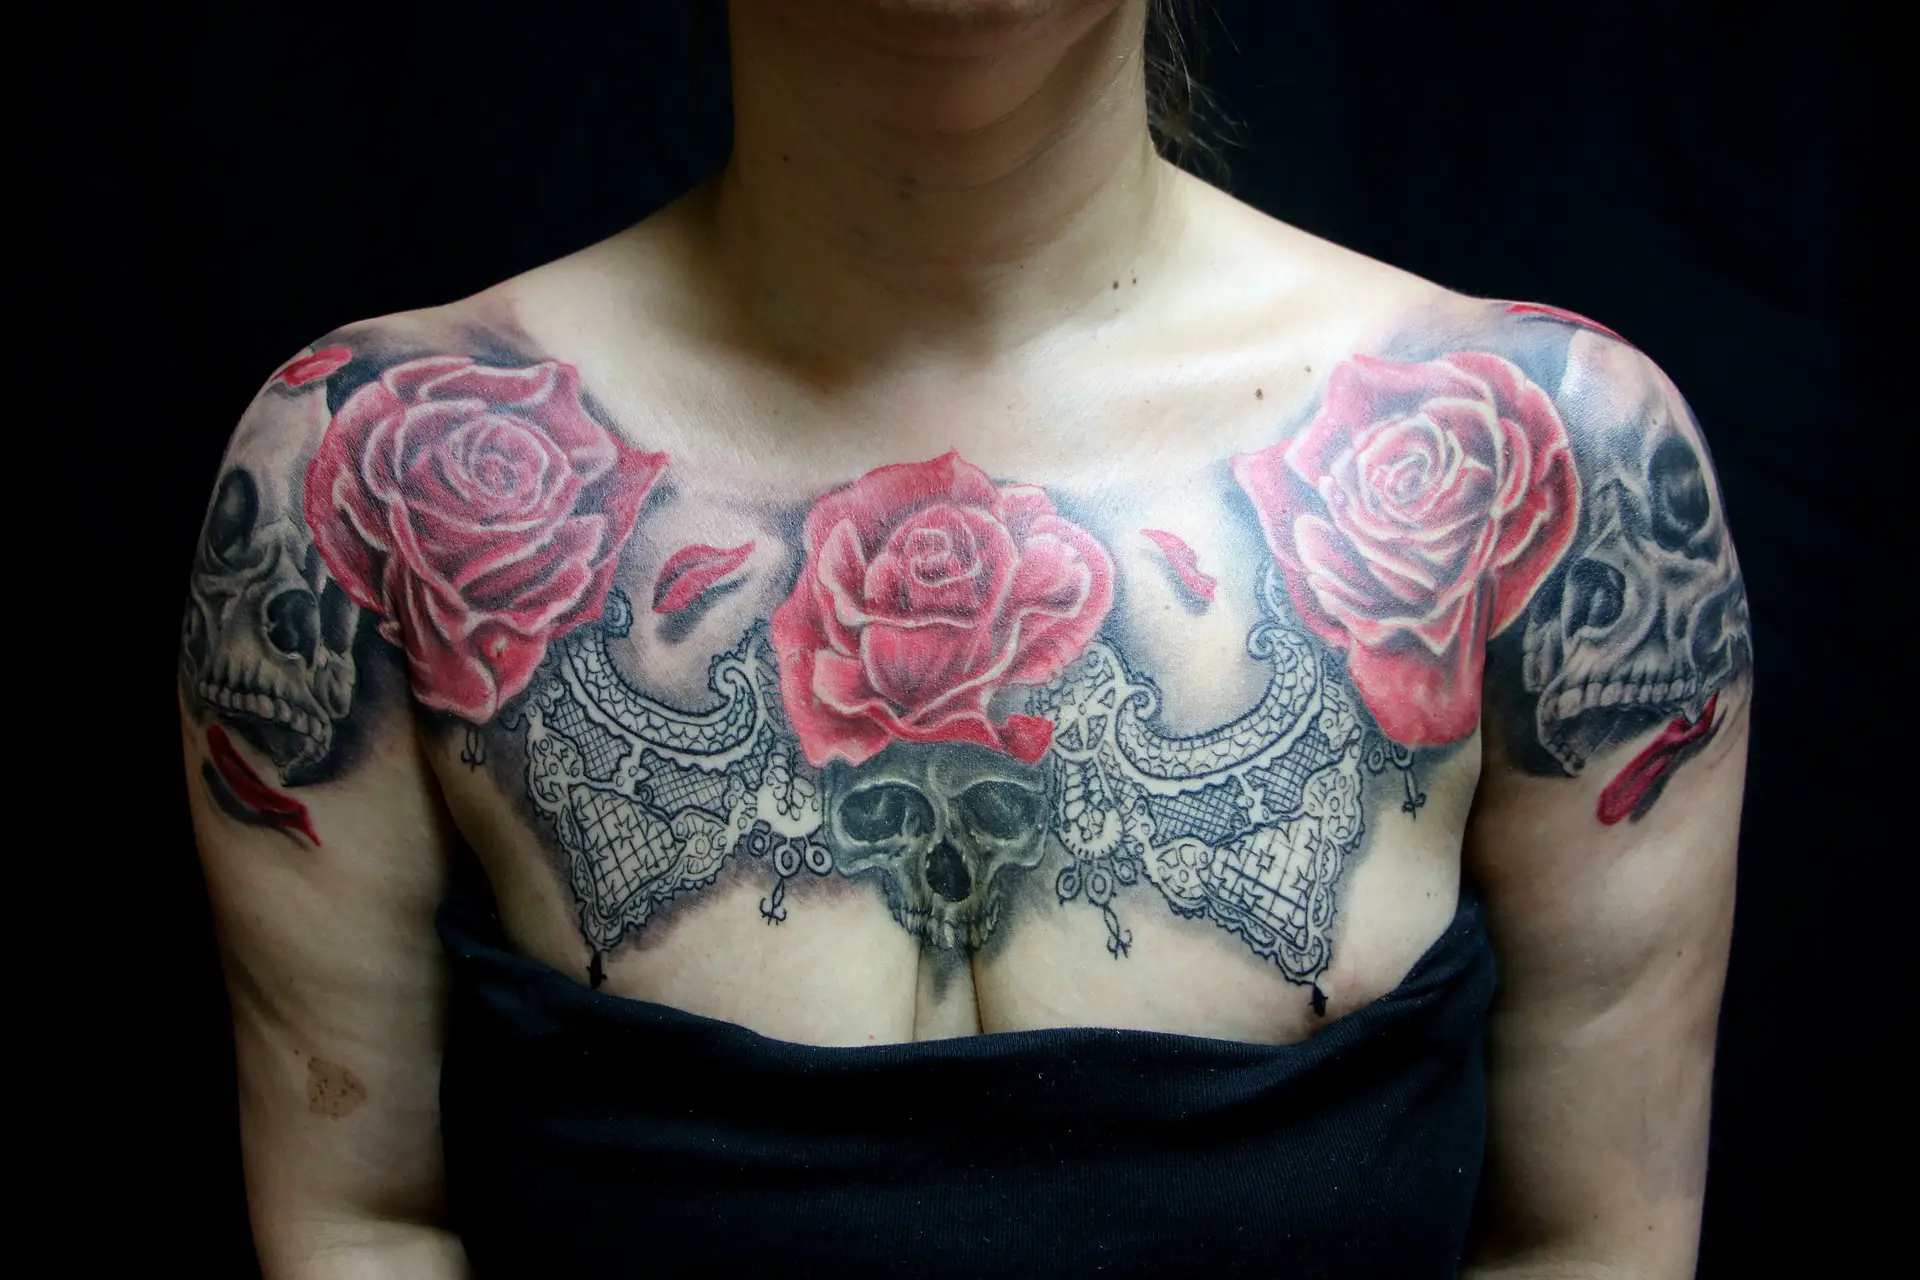 Chest Tattoo Pain - How Much Do They Hurt? - Tattify